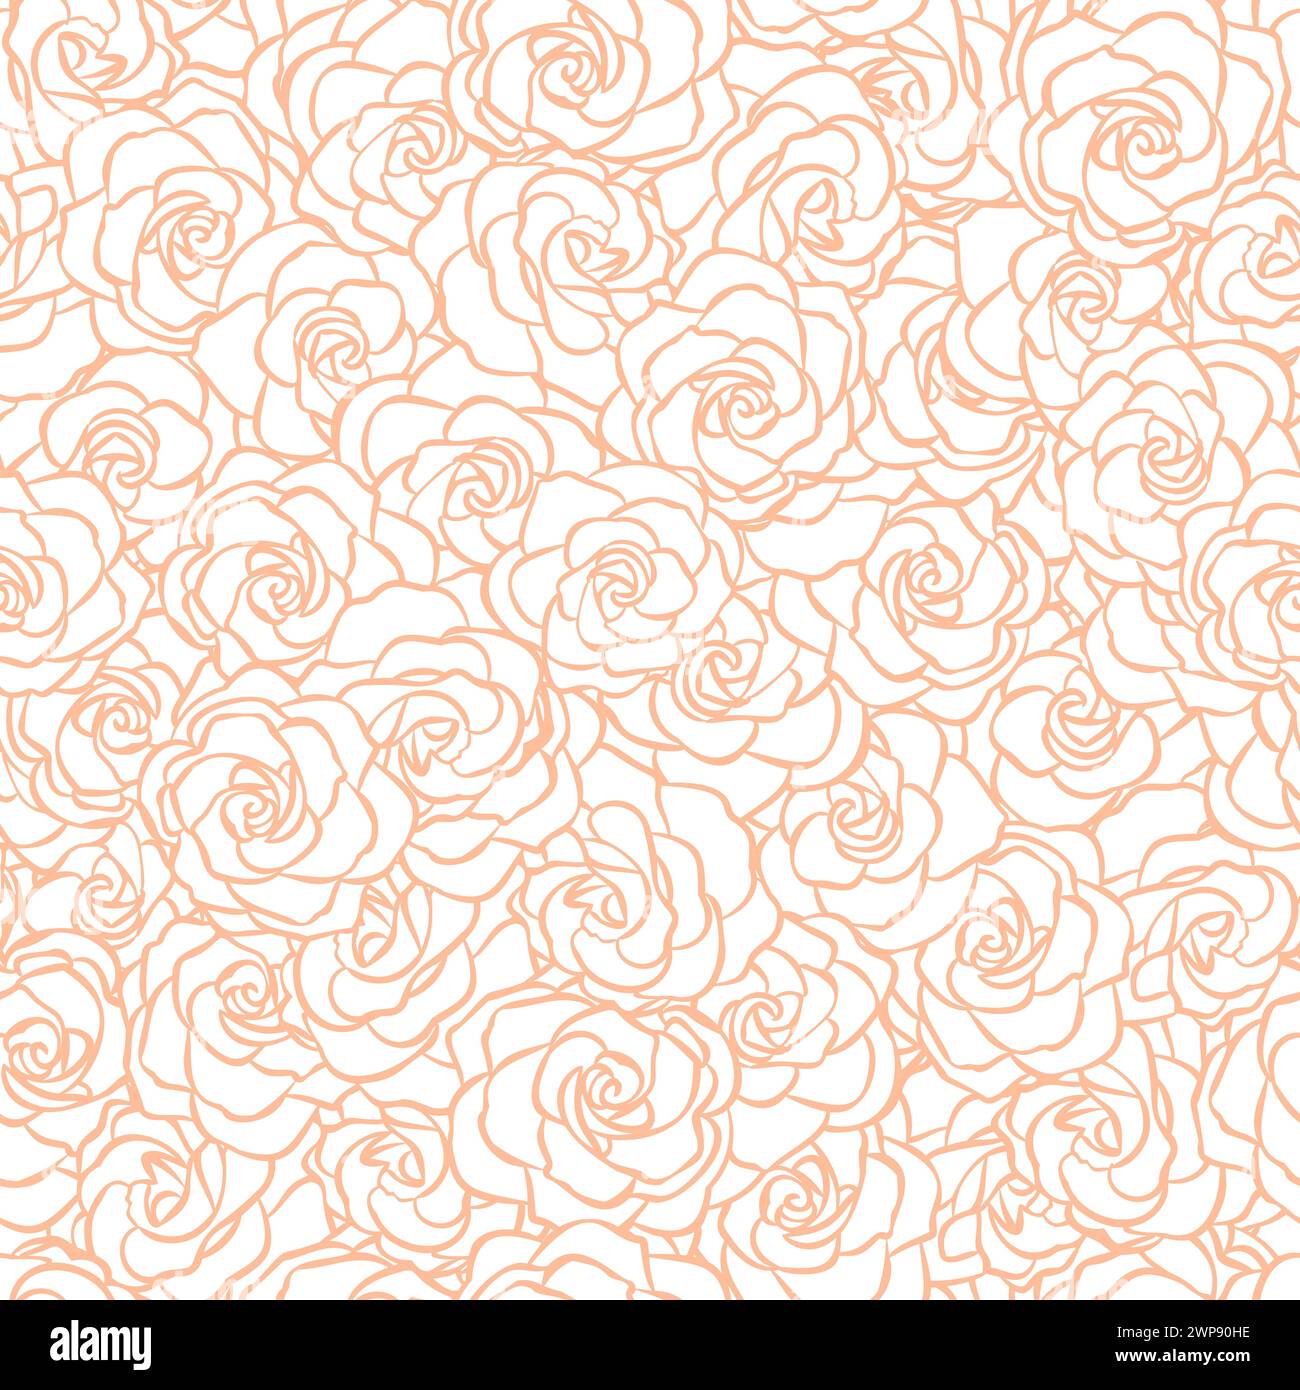 Peach fuzz flower seamless pattern. Delicate rose flower head for spring, girly background. Vector monochrome illustration for textile, scrapbook, fab Stock Vector